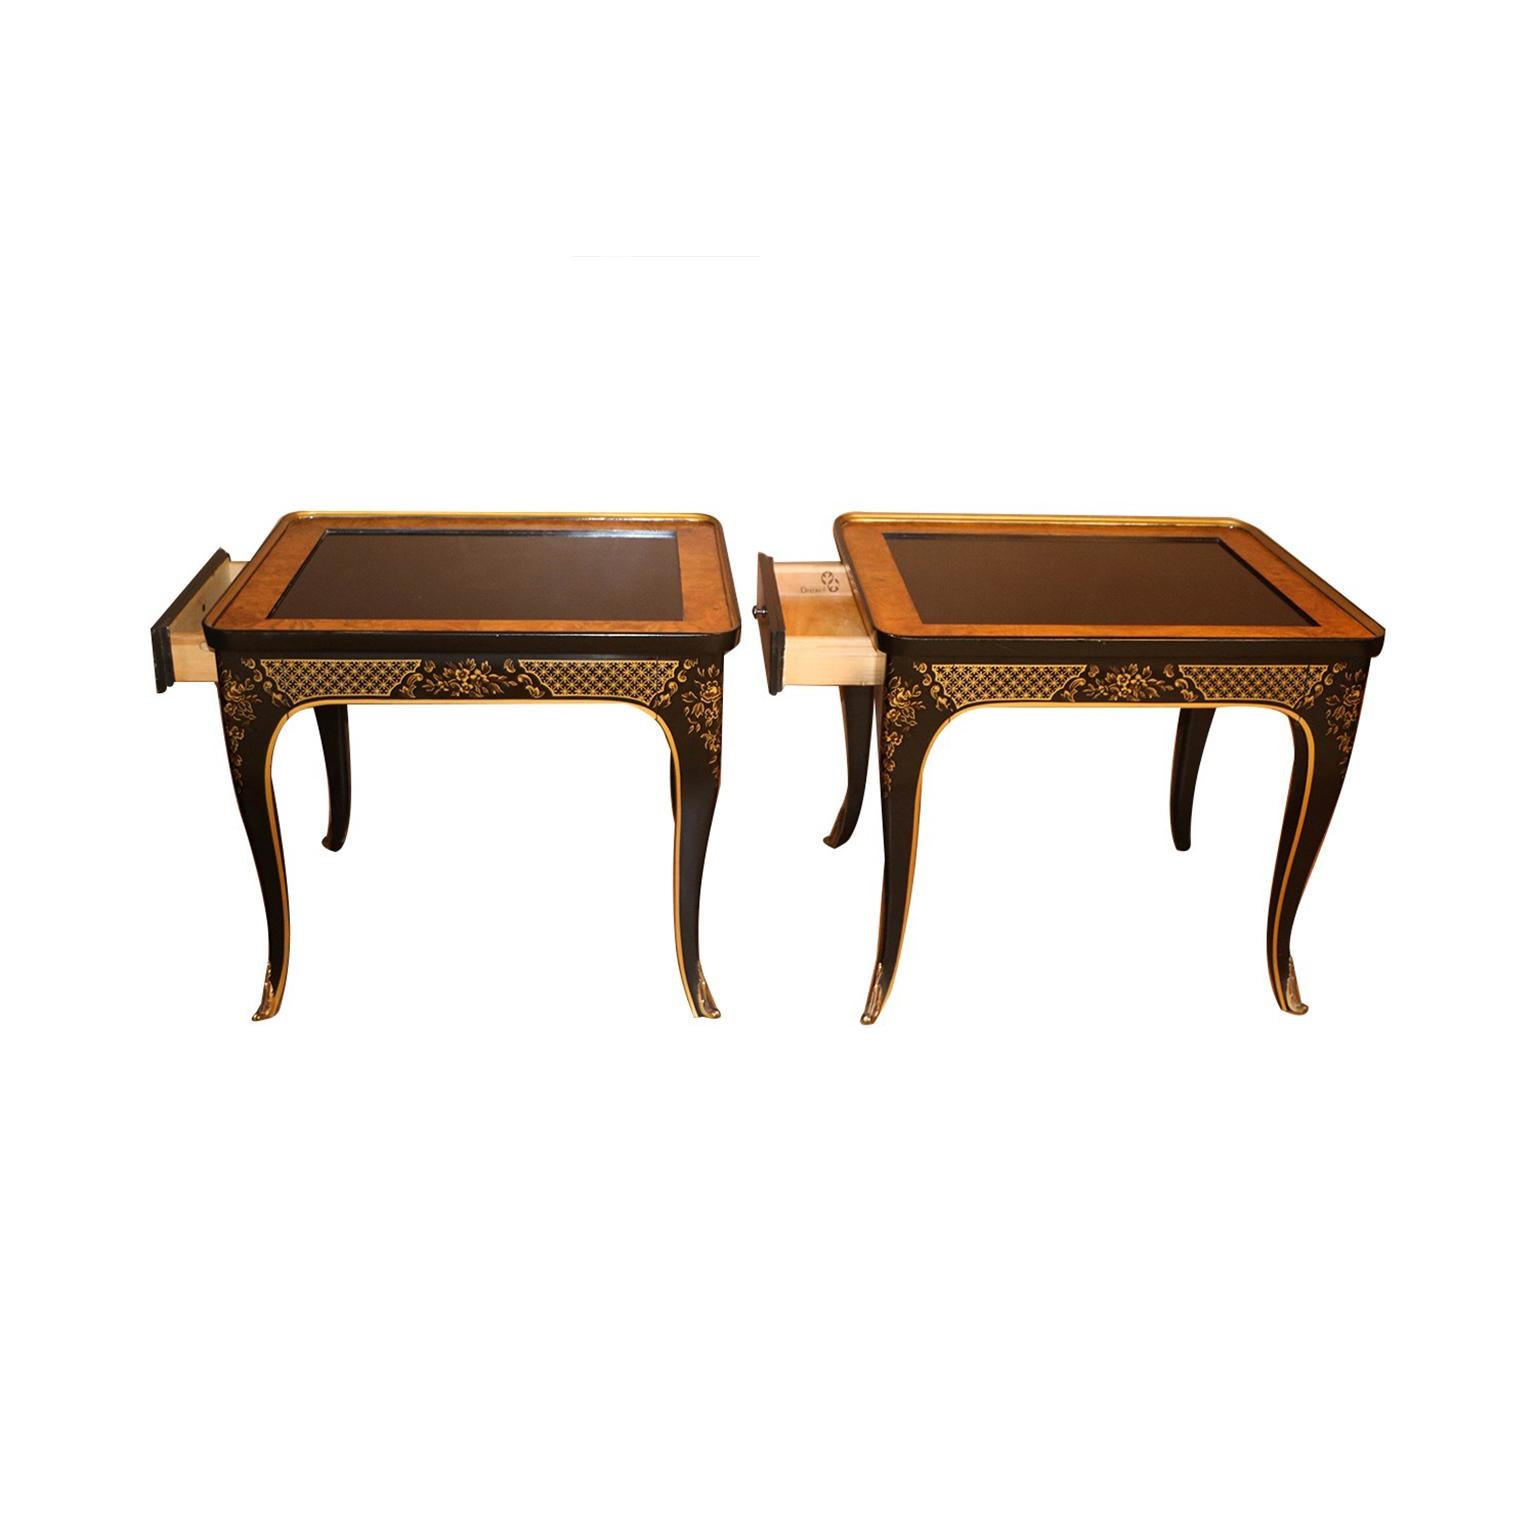 20th Century Pair of Et Cetera Chinoiserie Black Lacquer Side Tables by Drexel